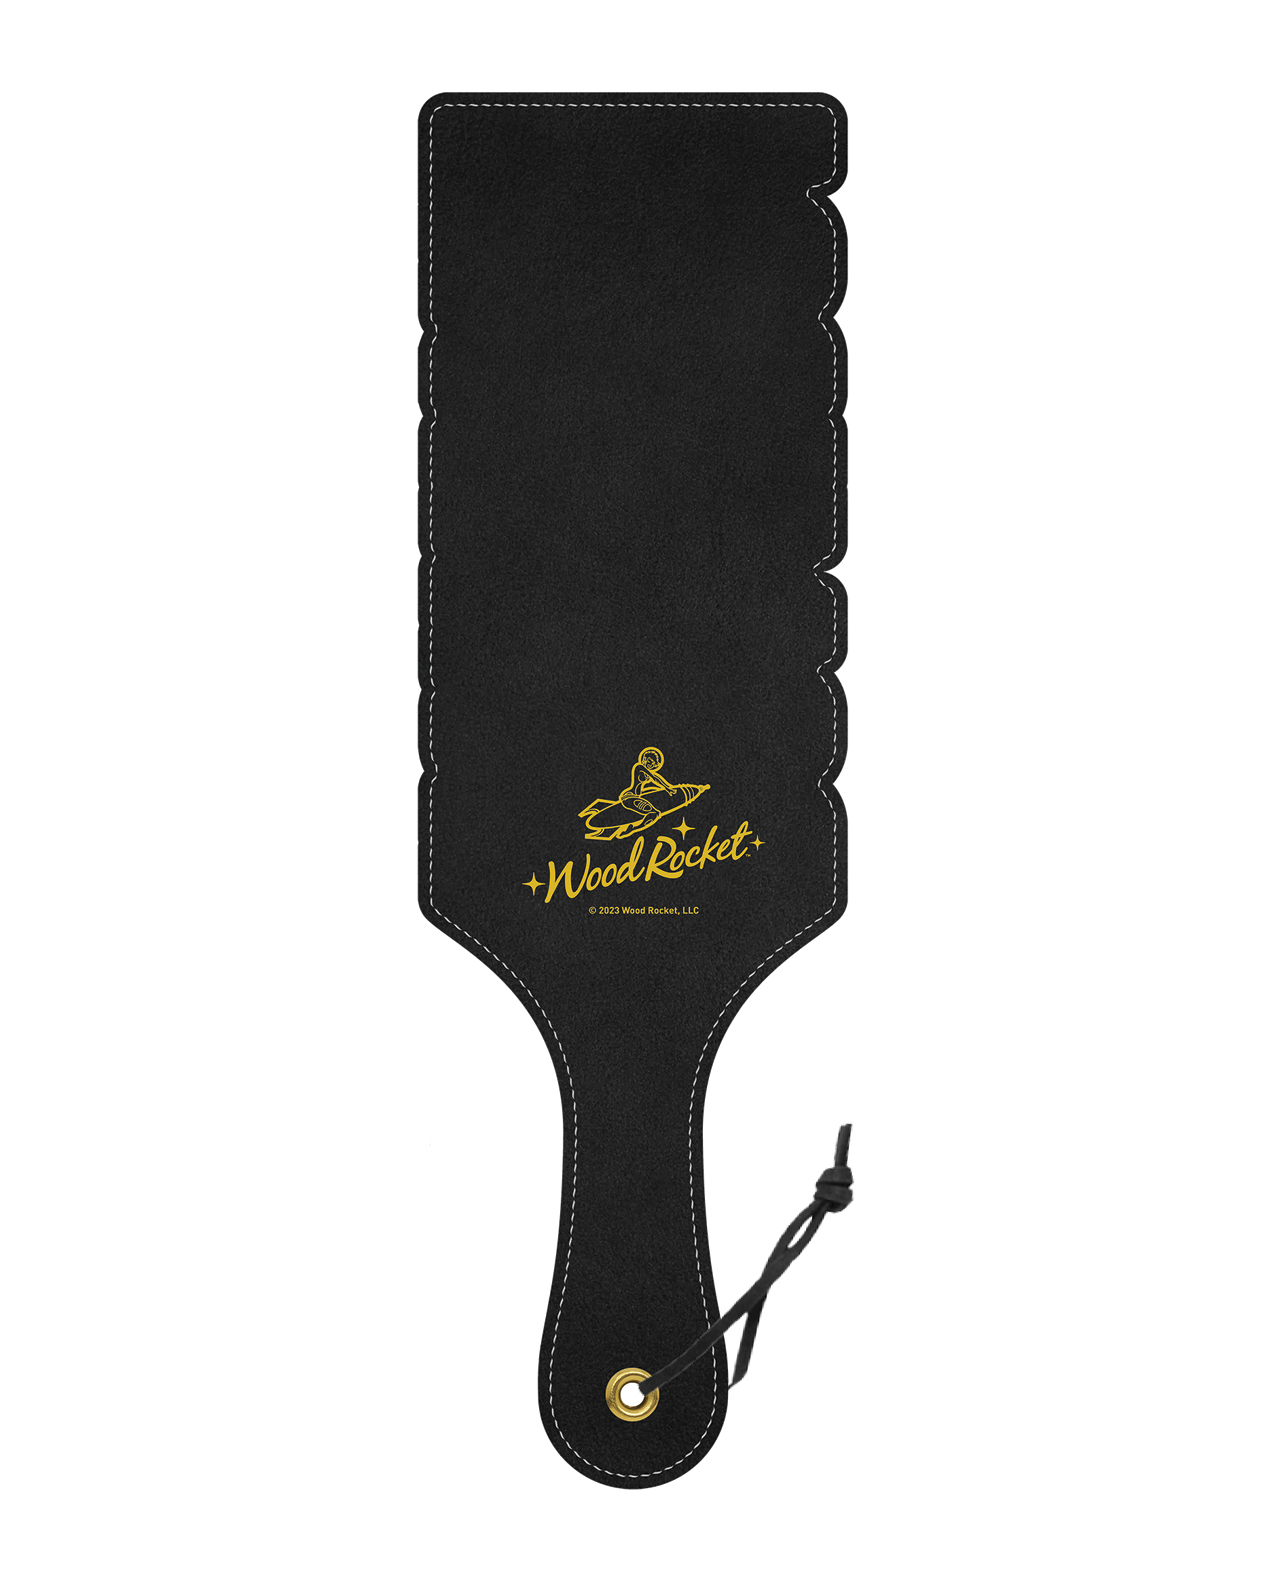 Sex & Mischief Paddle with Studs - Buy here 